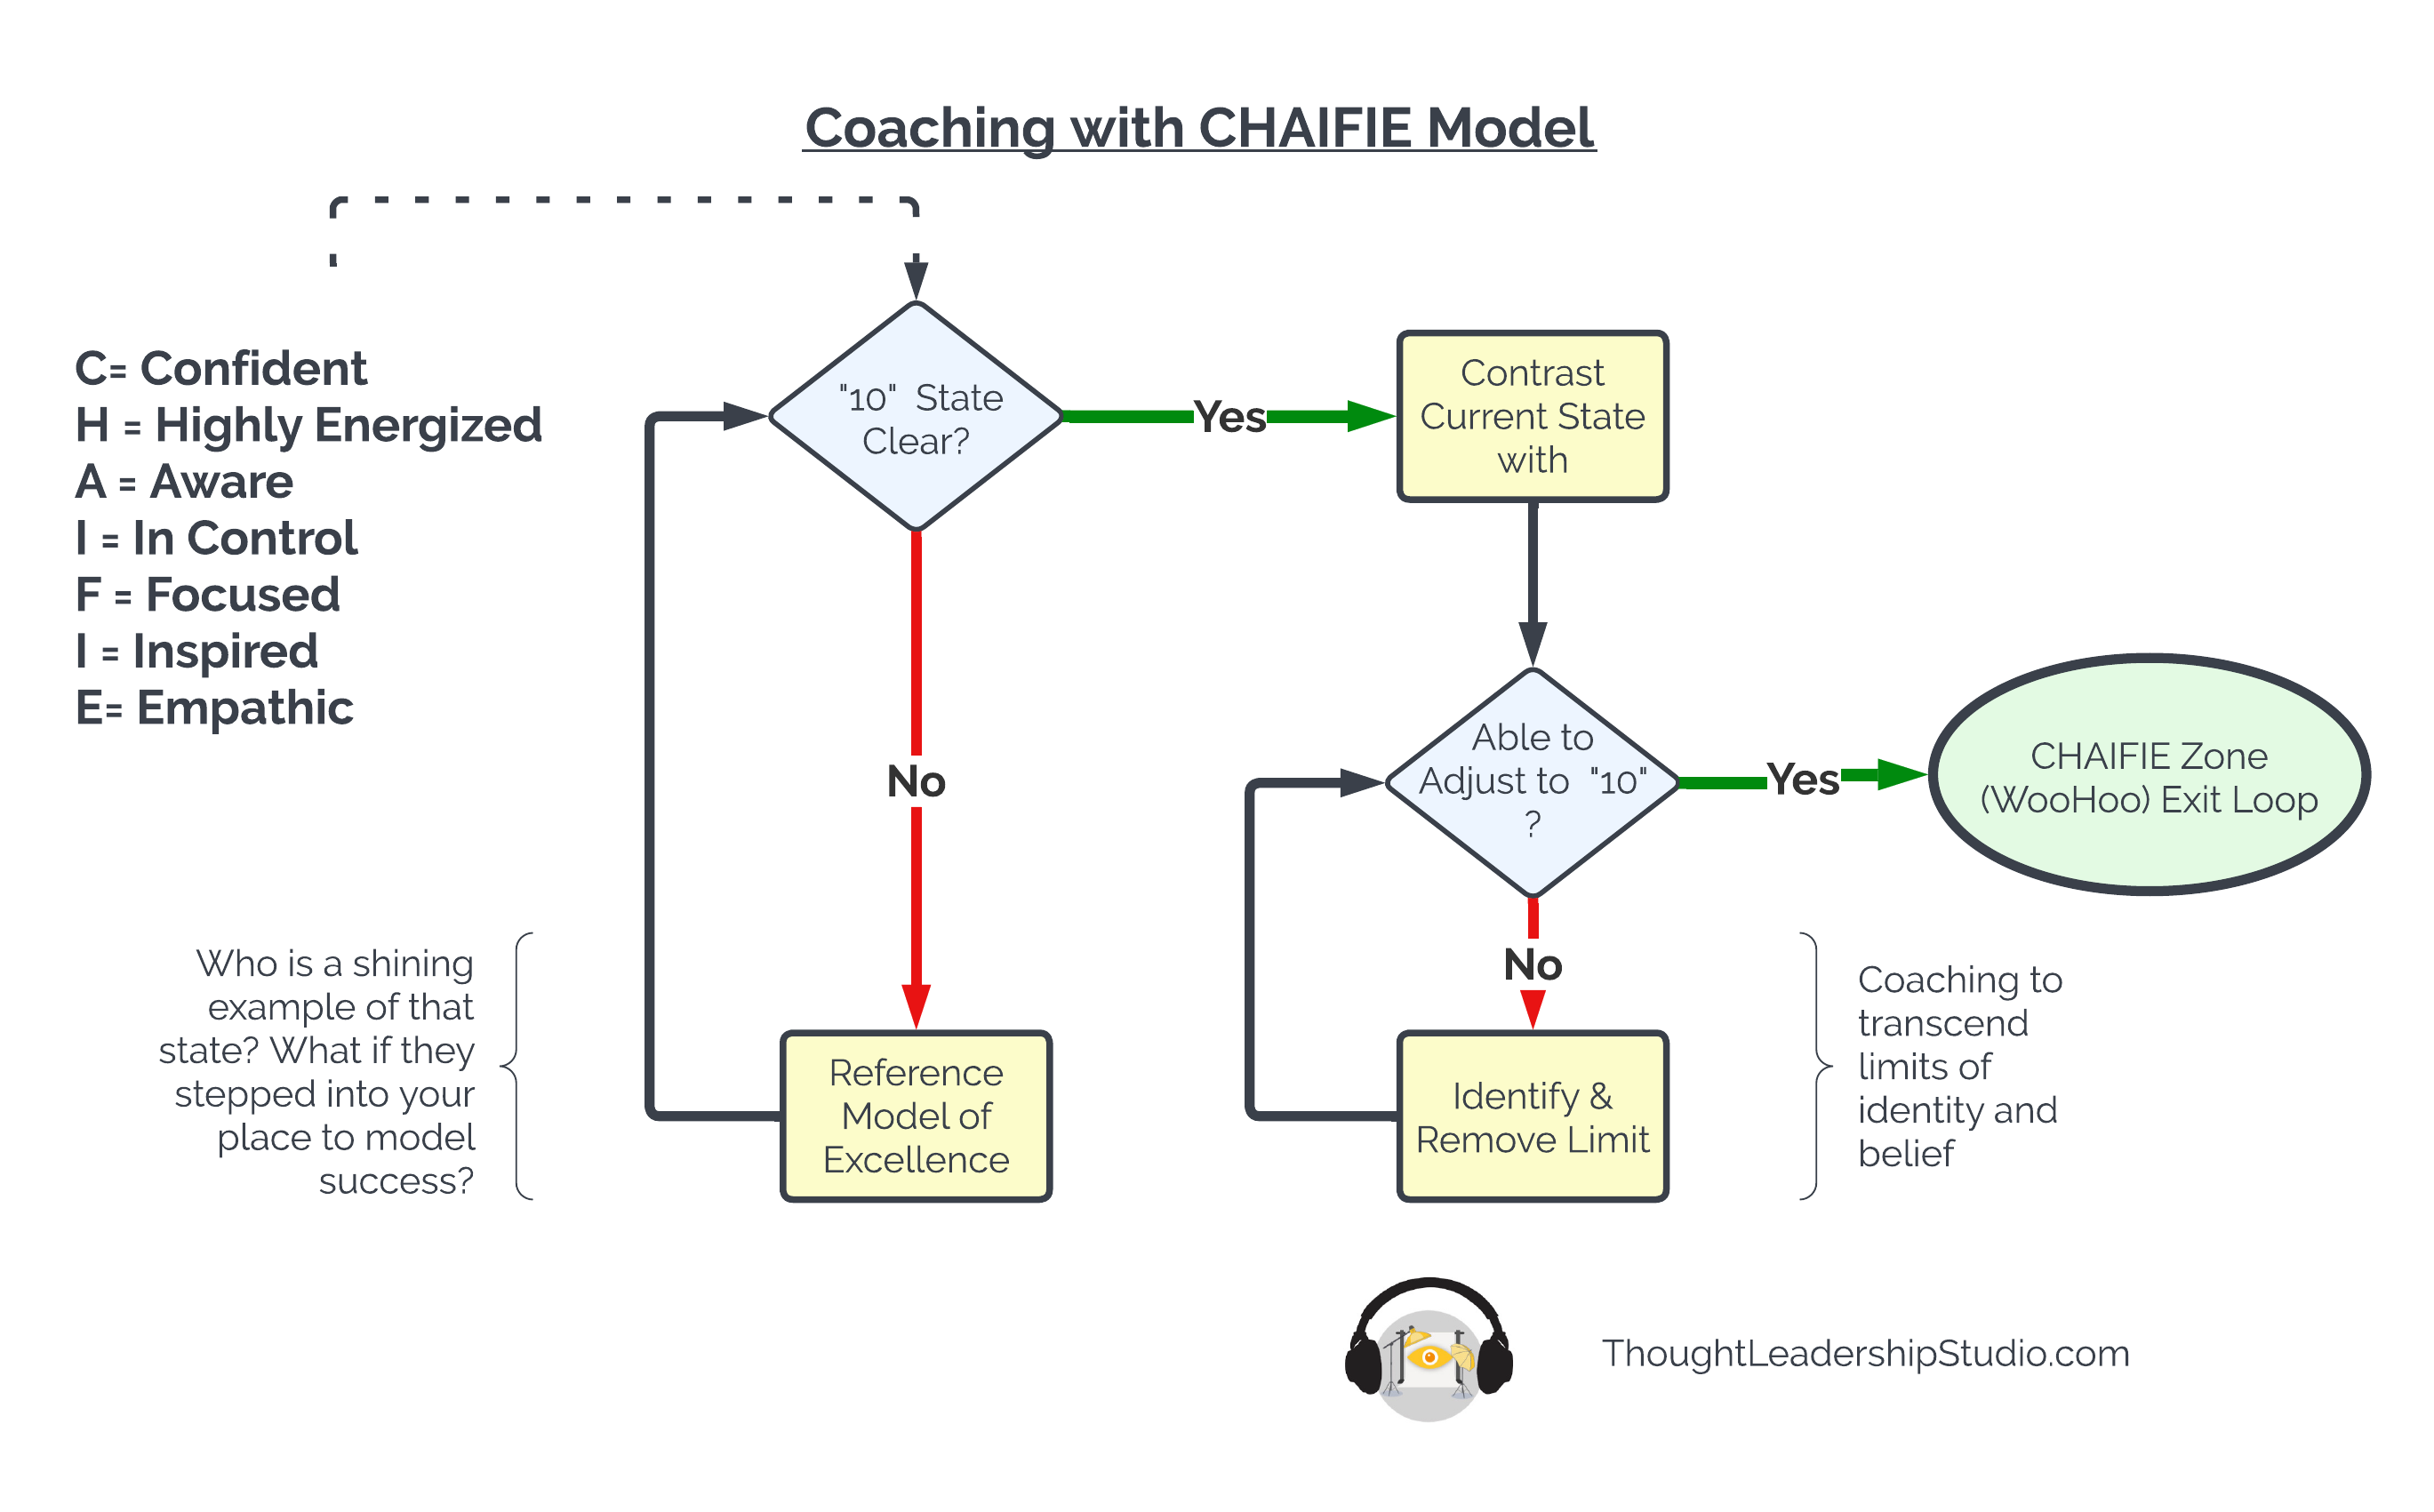 CHAIFIE Coaching Model from Thought Leadership Studio